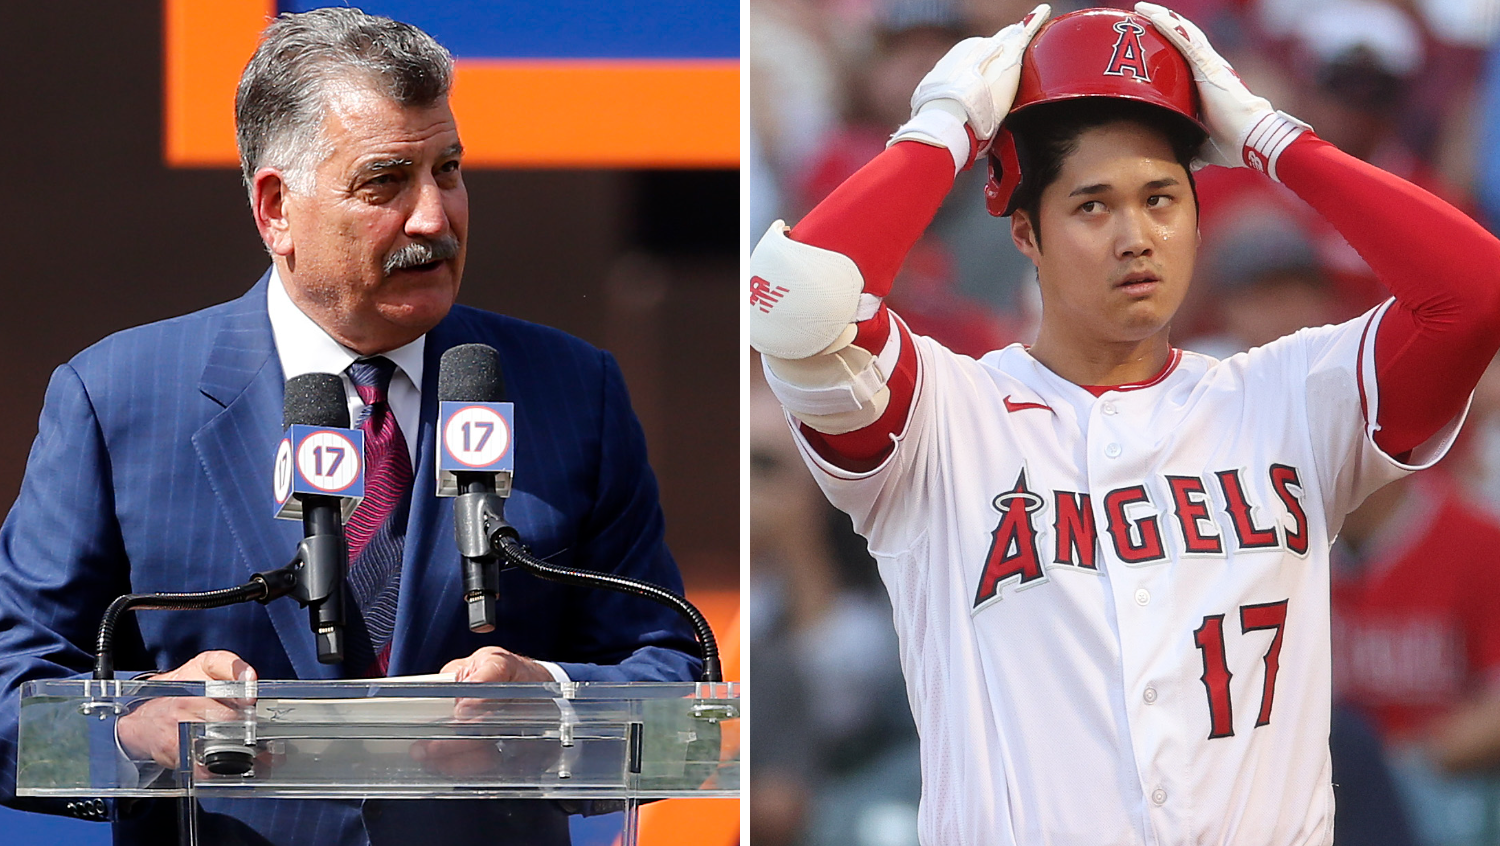 Angels Star Shohei Ohtani Finishes with the Best-selling Jersey in